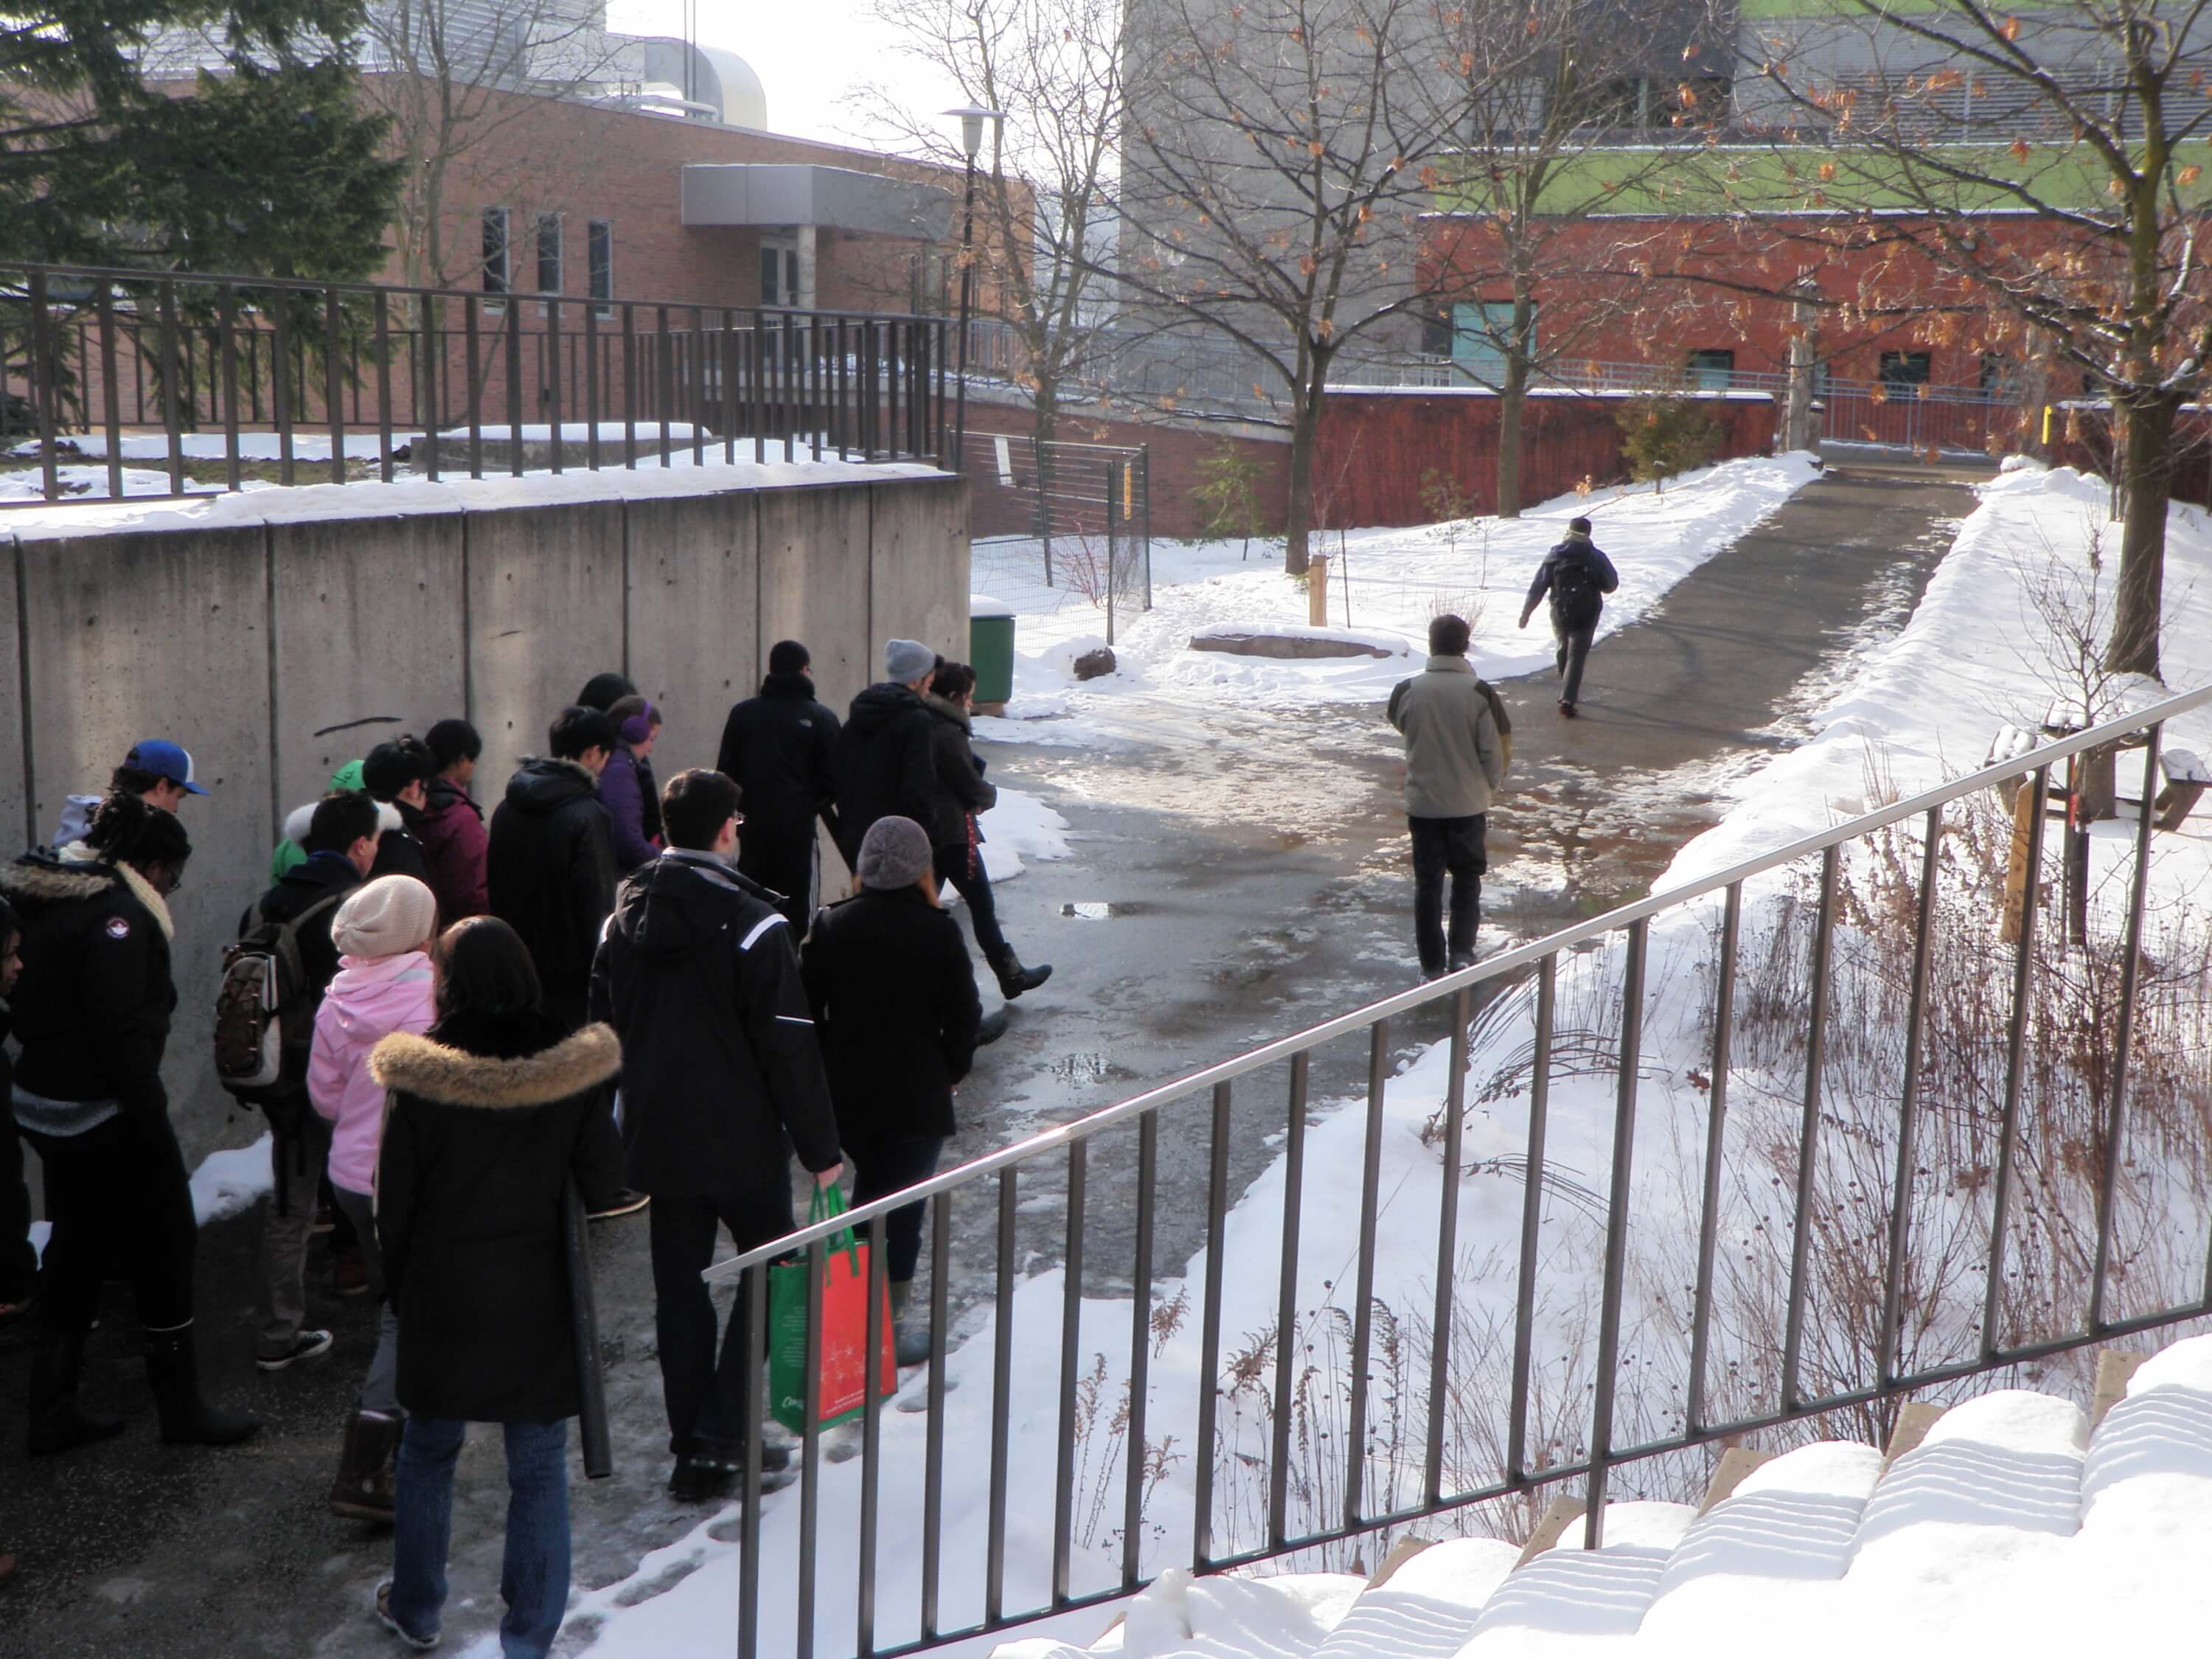 Students touring campus in winter